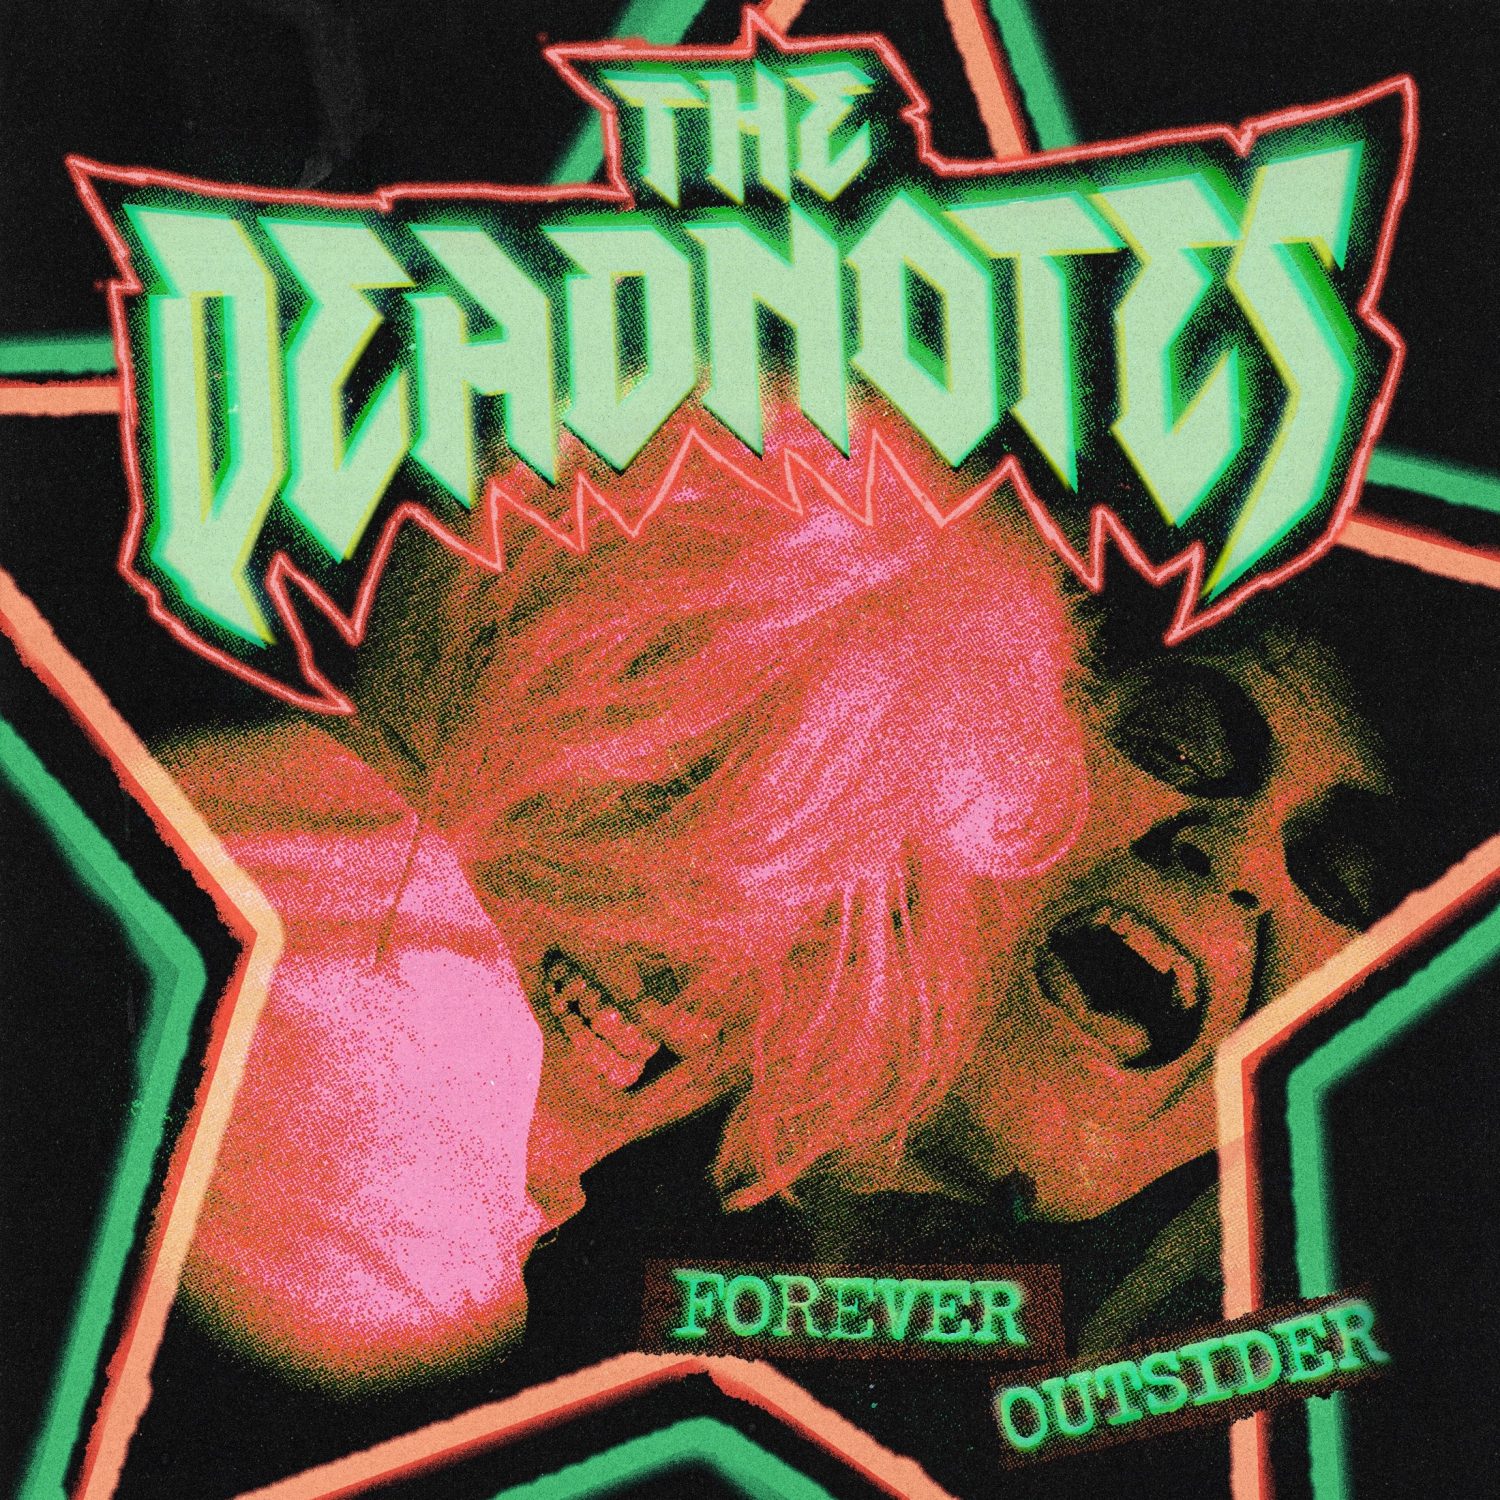 EP REVIEW: Forever Outsider by The Deadnotes